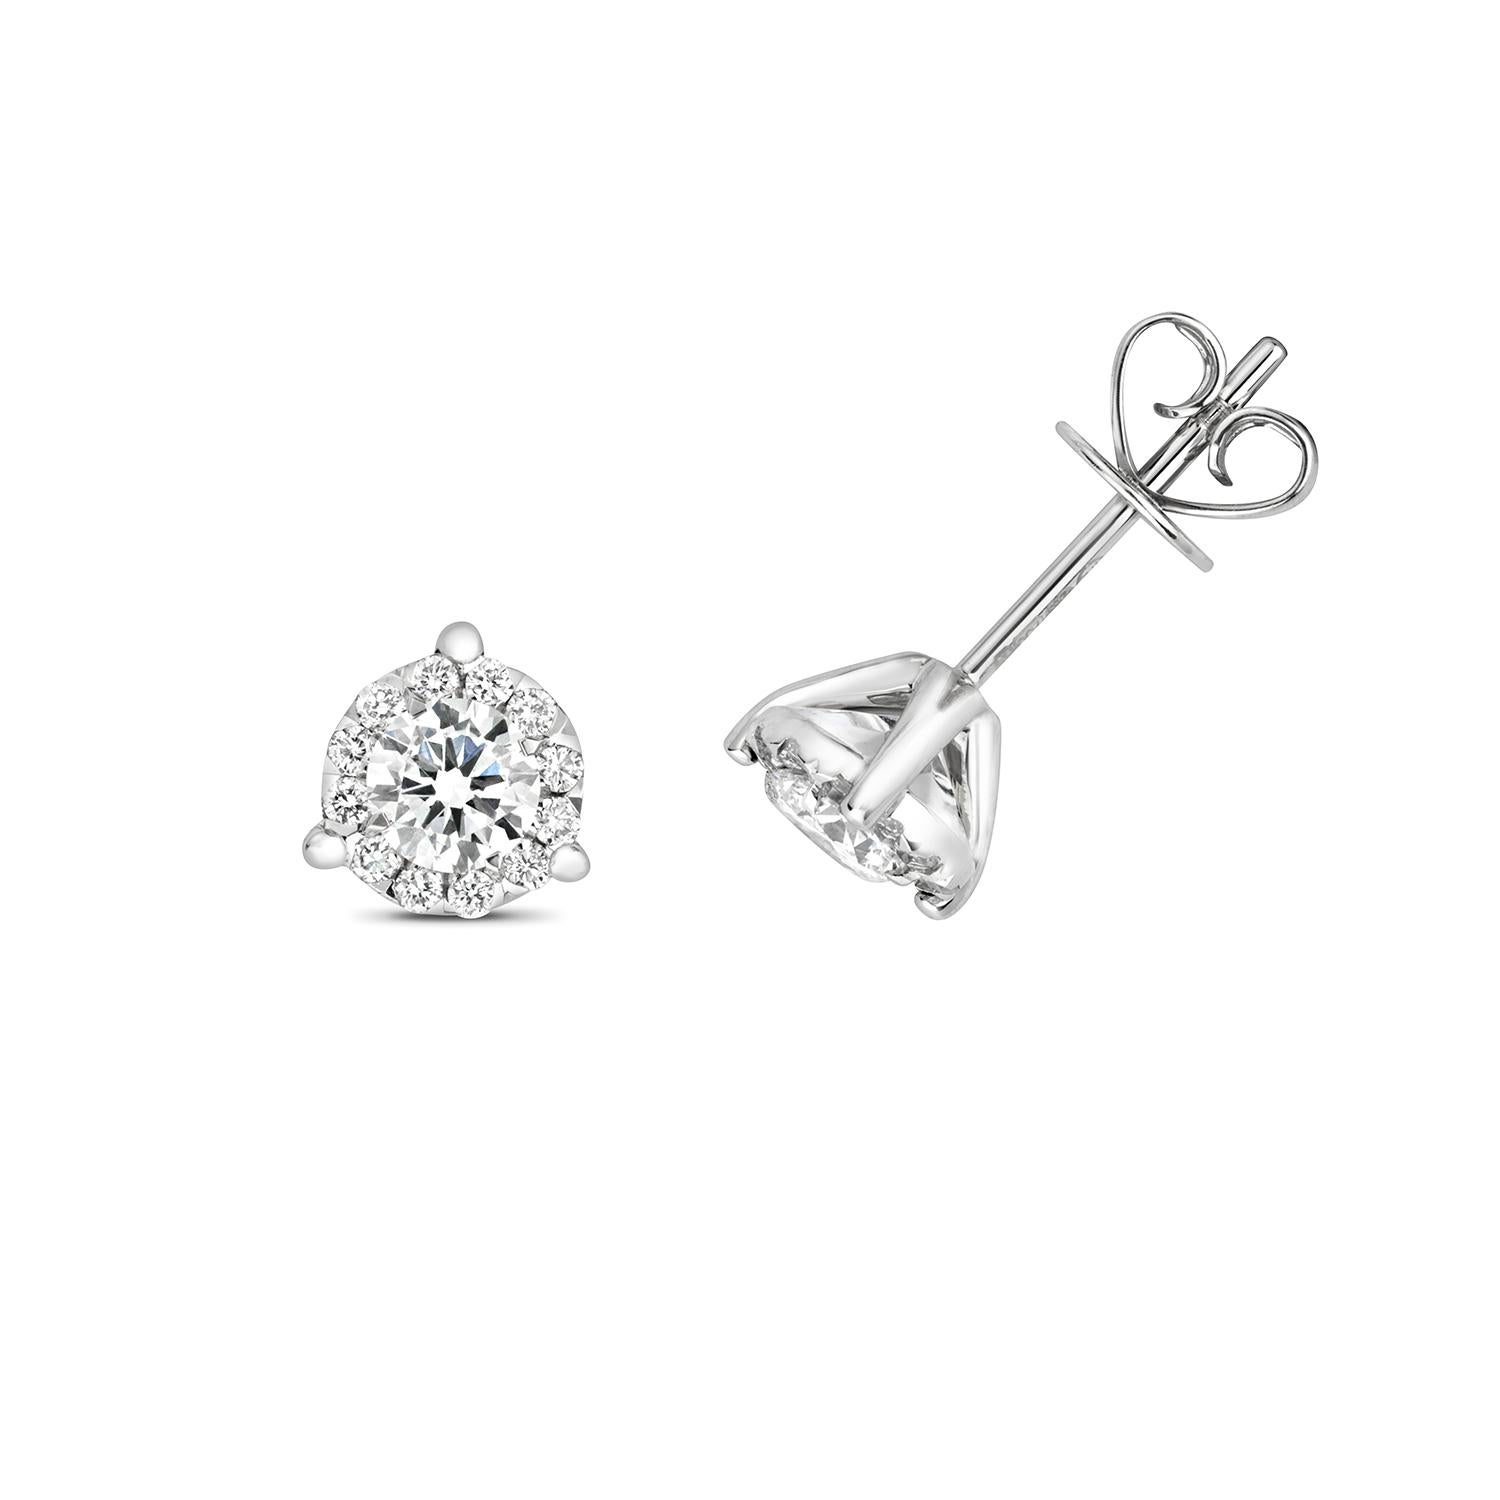 DIAMOND BRILLIANT 3 CLAW STUDS

18CT W/G GH SI1 0.61CT

Weight: 2.1g

Number Of Stones:26

Total Carates:0.610